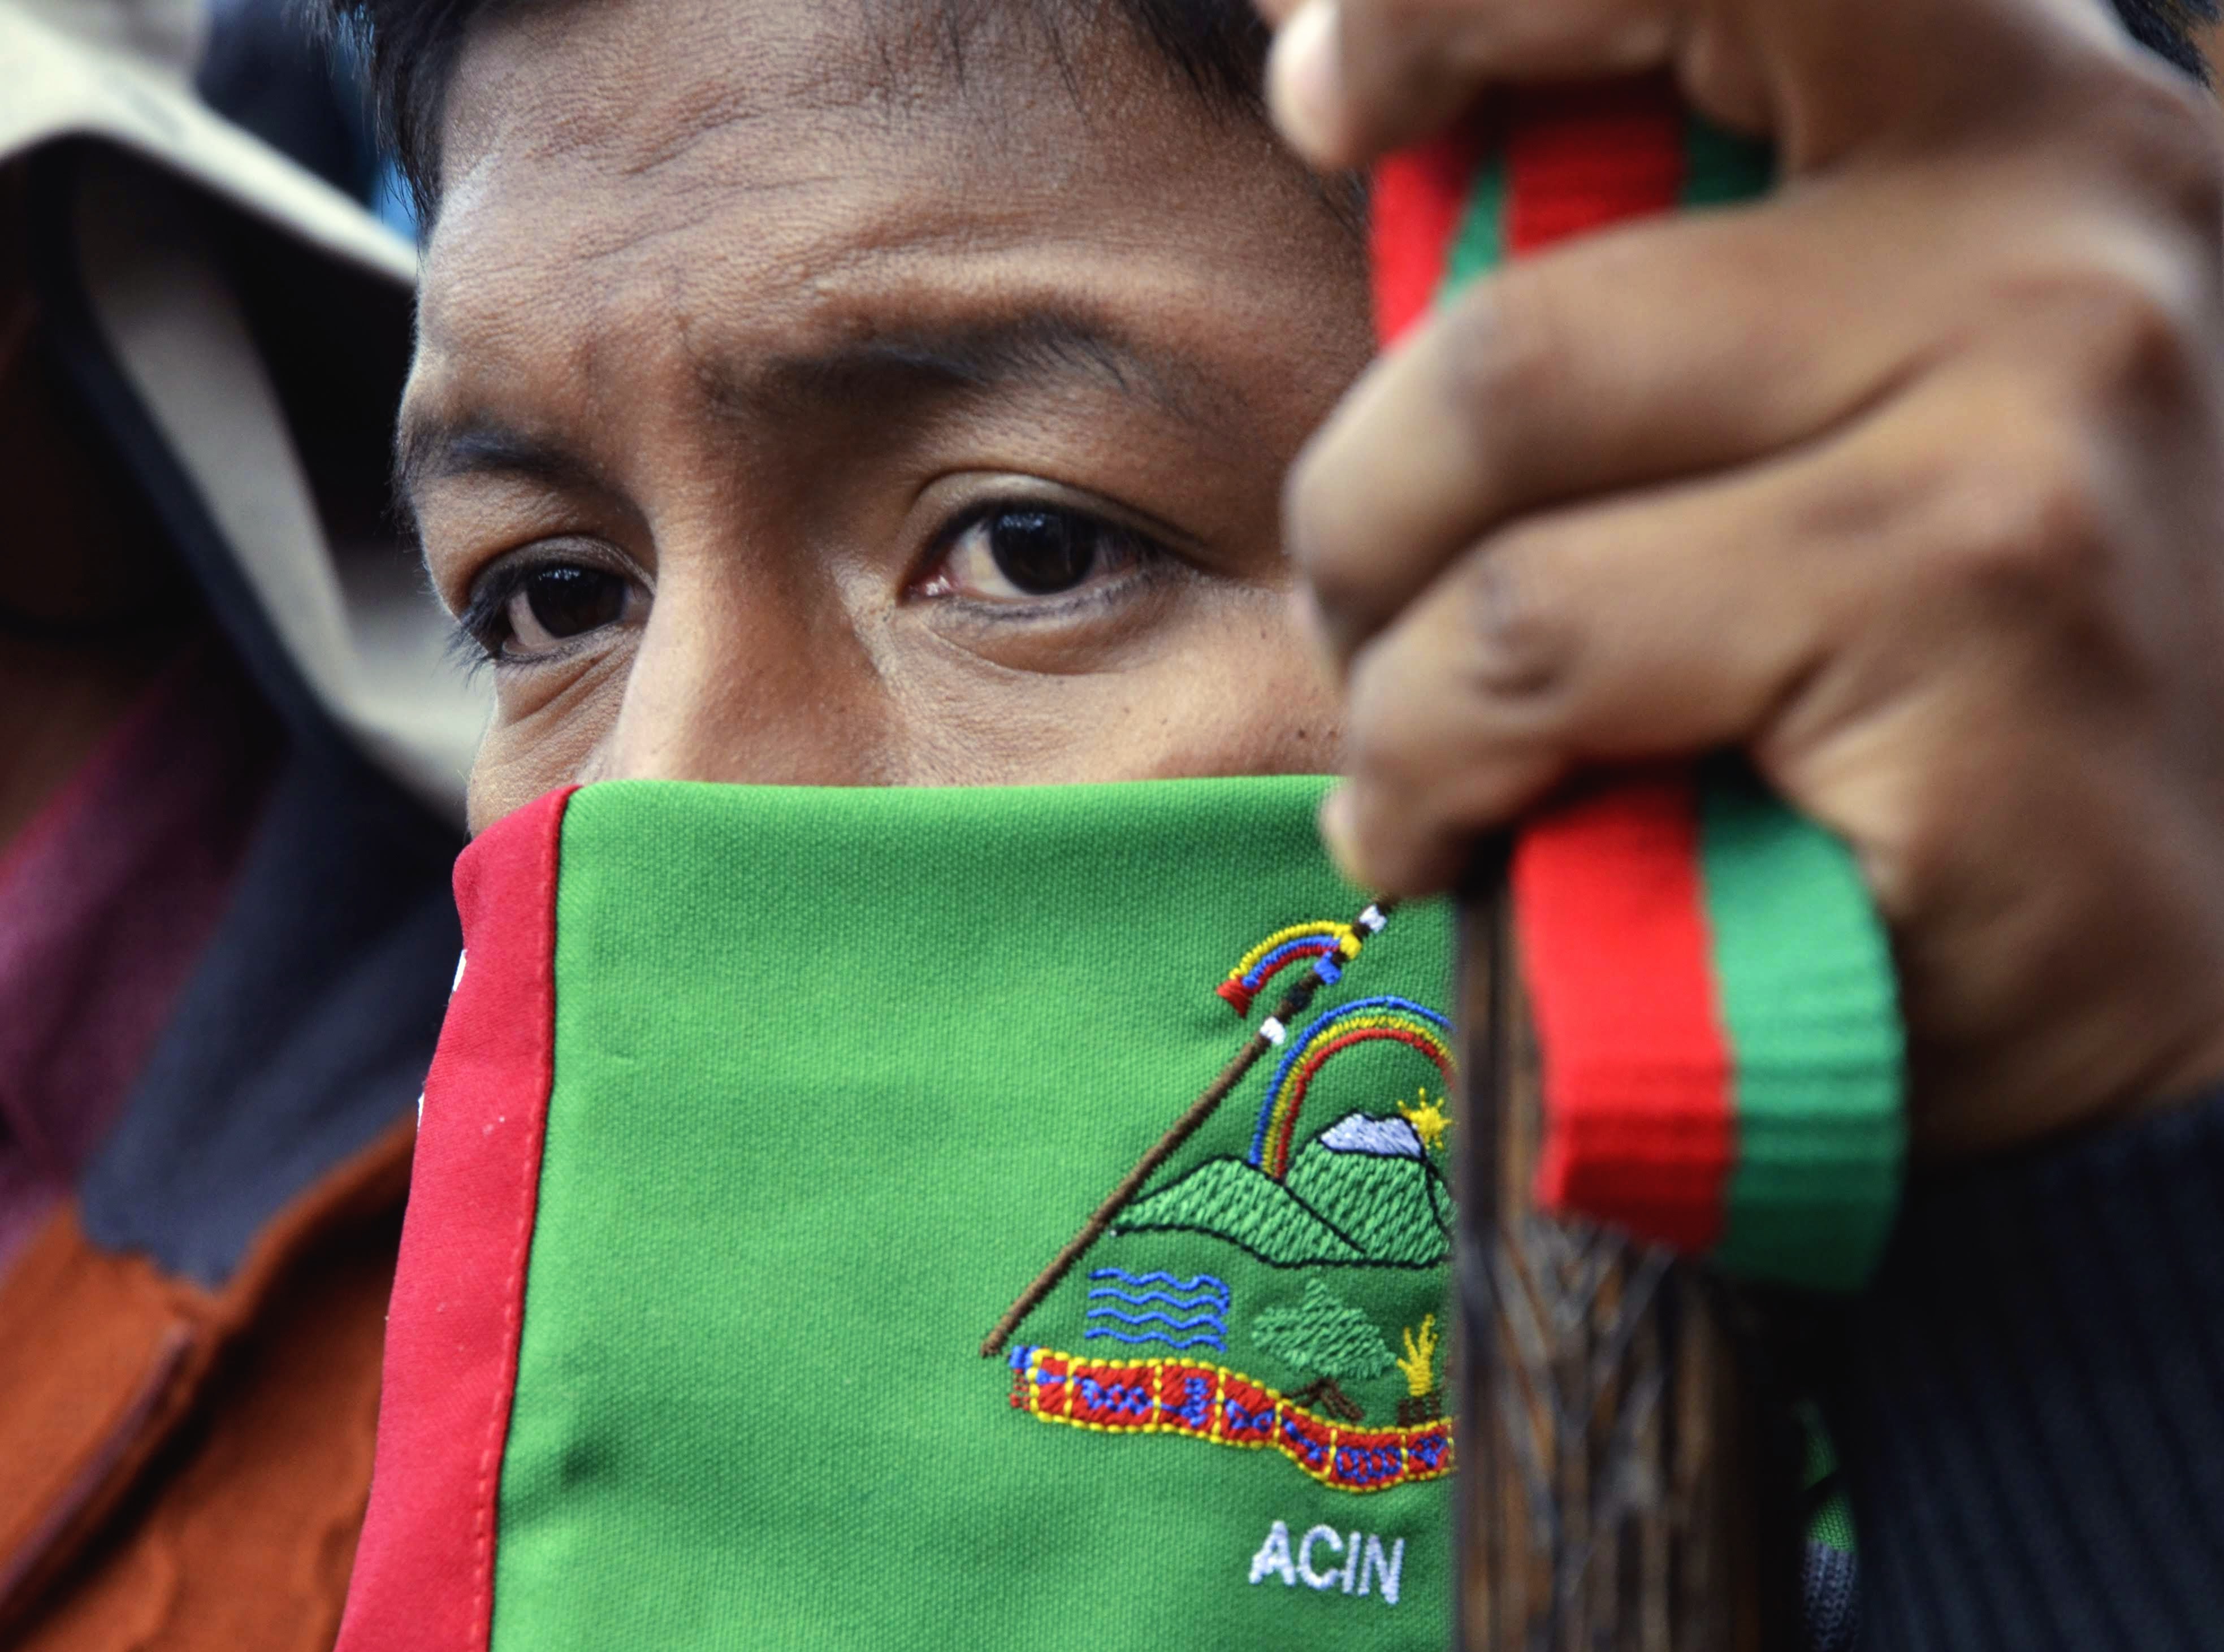 Member of the Indigenous Guard in a protest against the Colombian government. © 2019 Carlos Hernando Tapia Caicedo. All rights reserved.